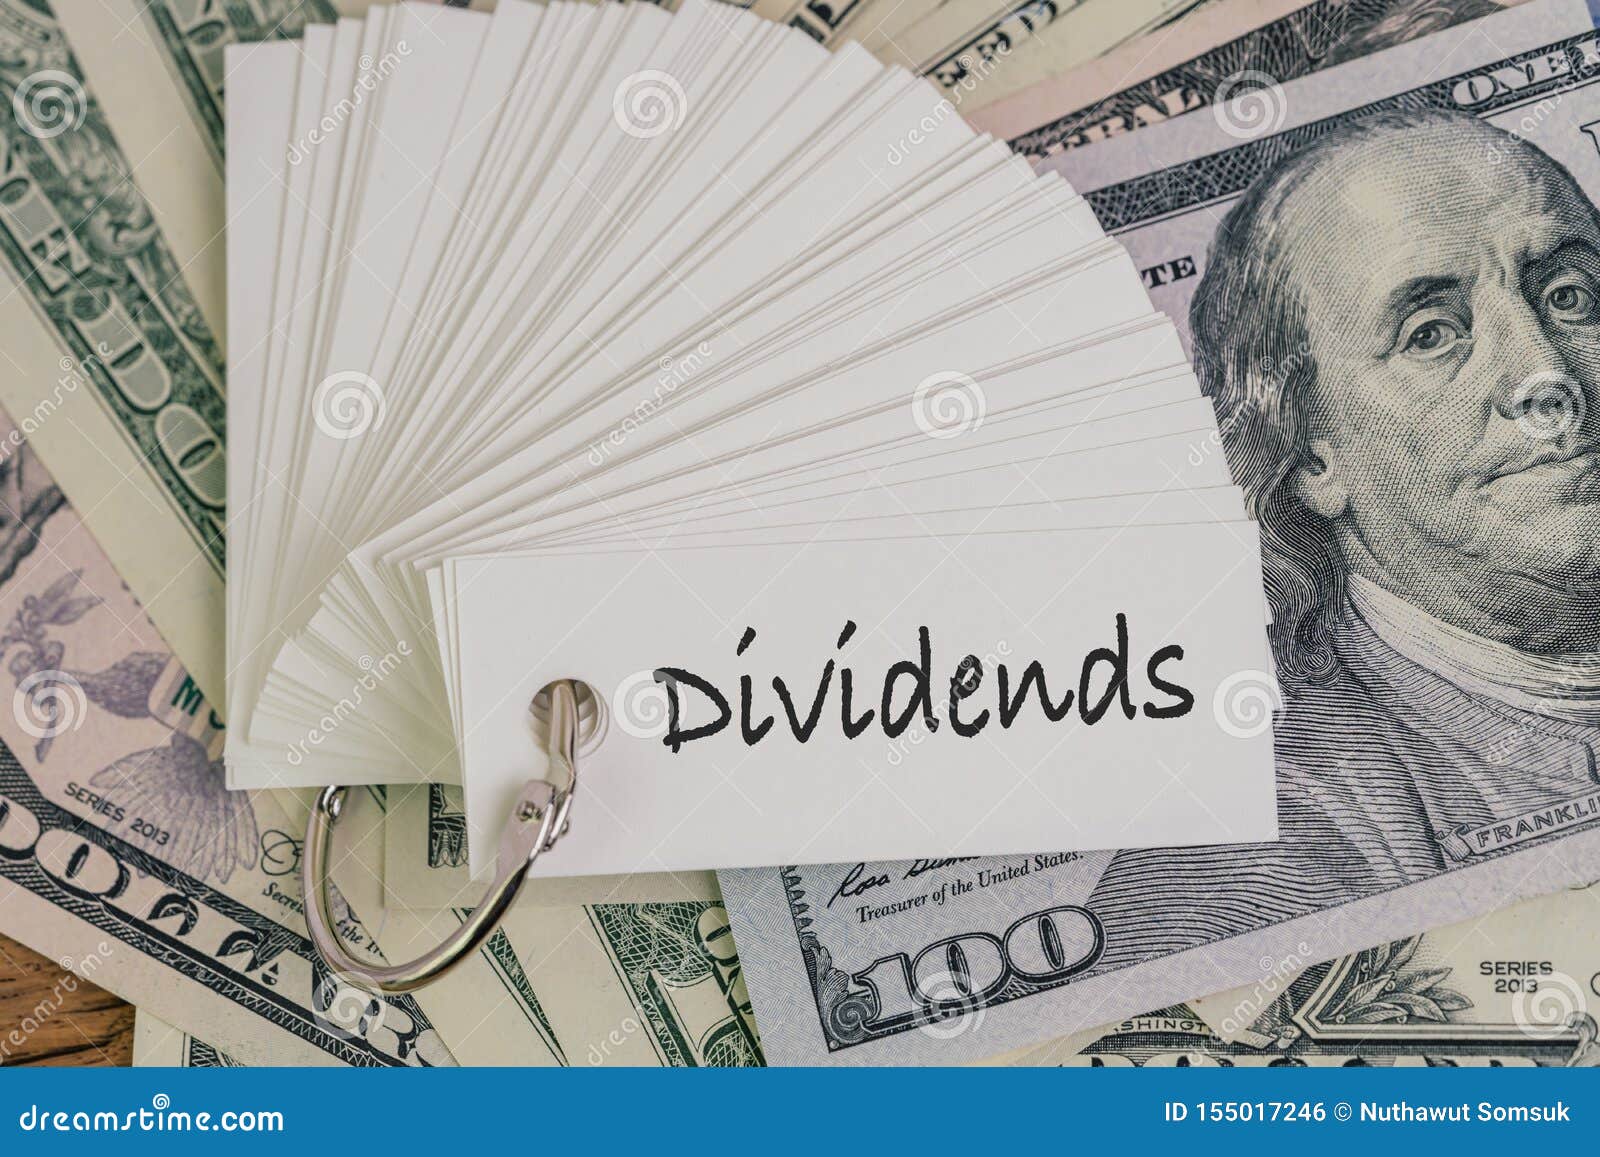 dividends, return or earning that pay from stock or mutual fund investing concept, lot of paper notes with handwriting word